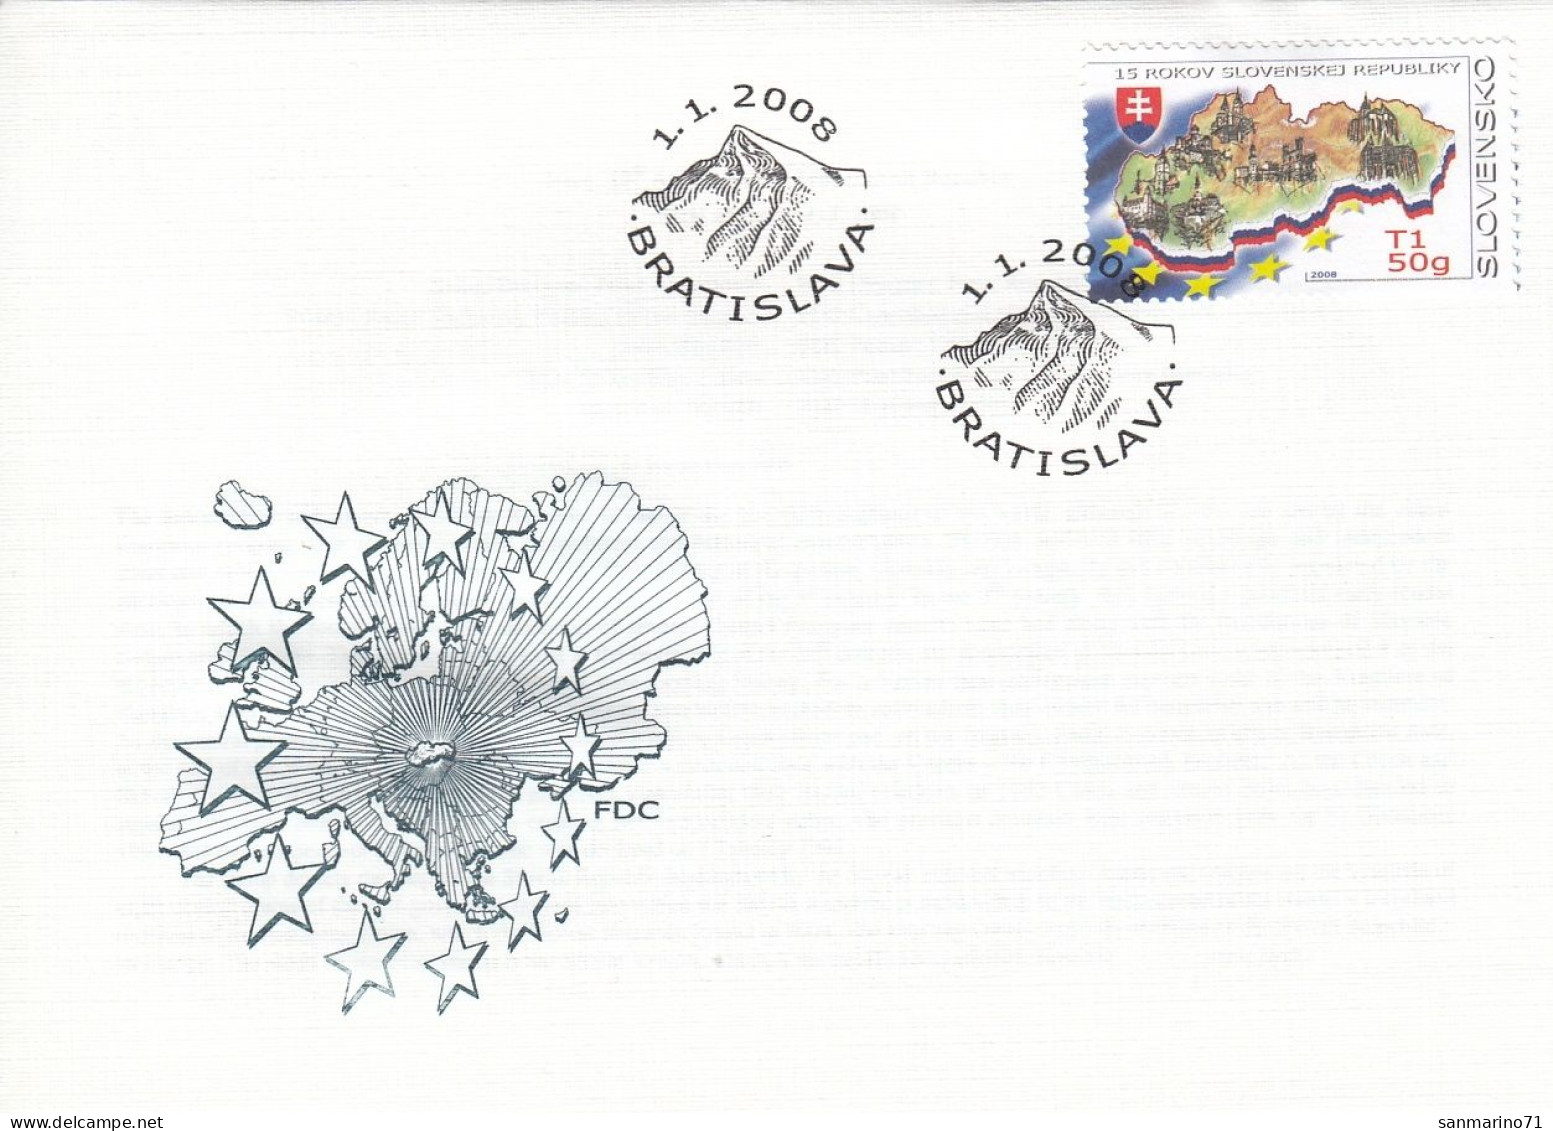 FDC SLOVAKIA 572 - Institutions Européennes